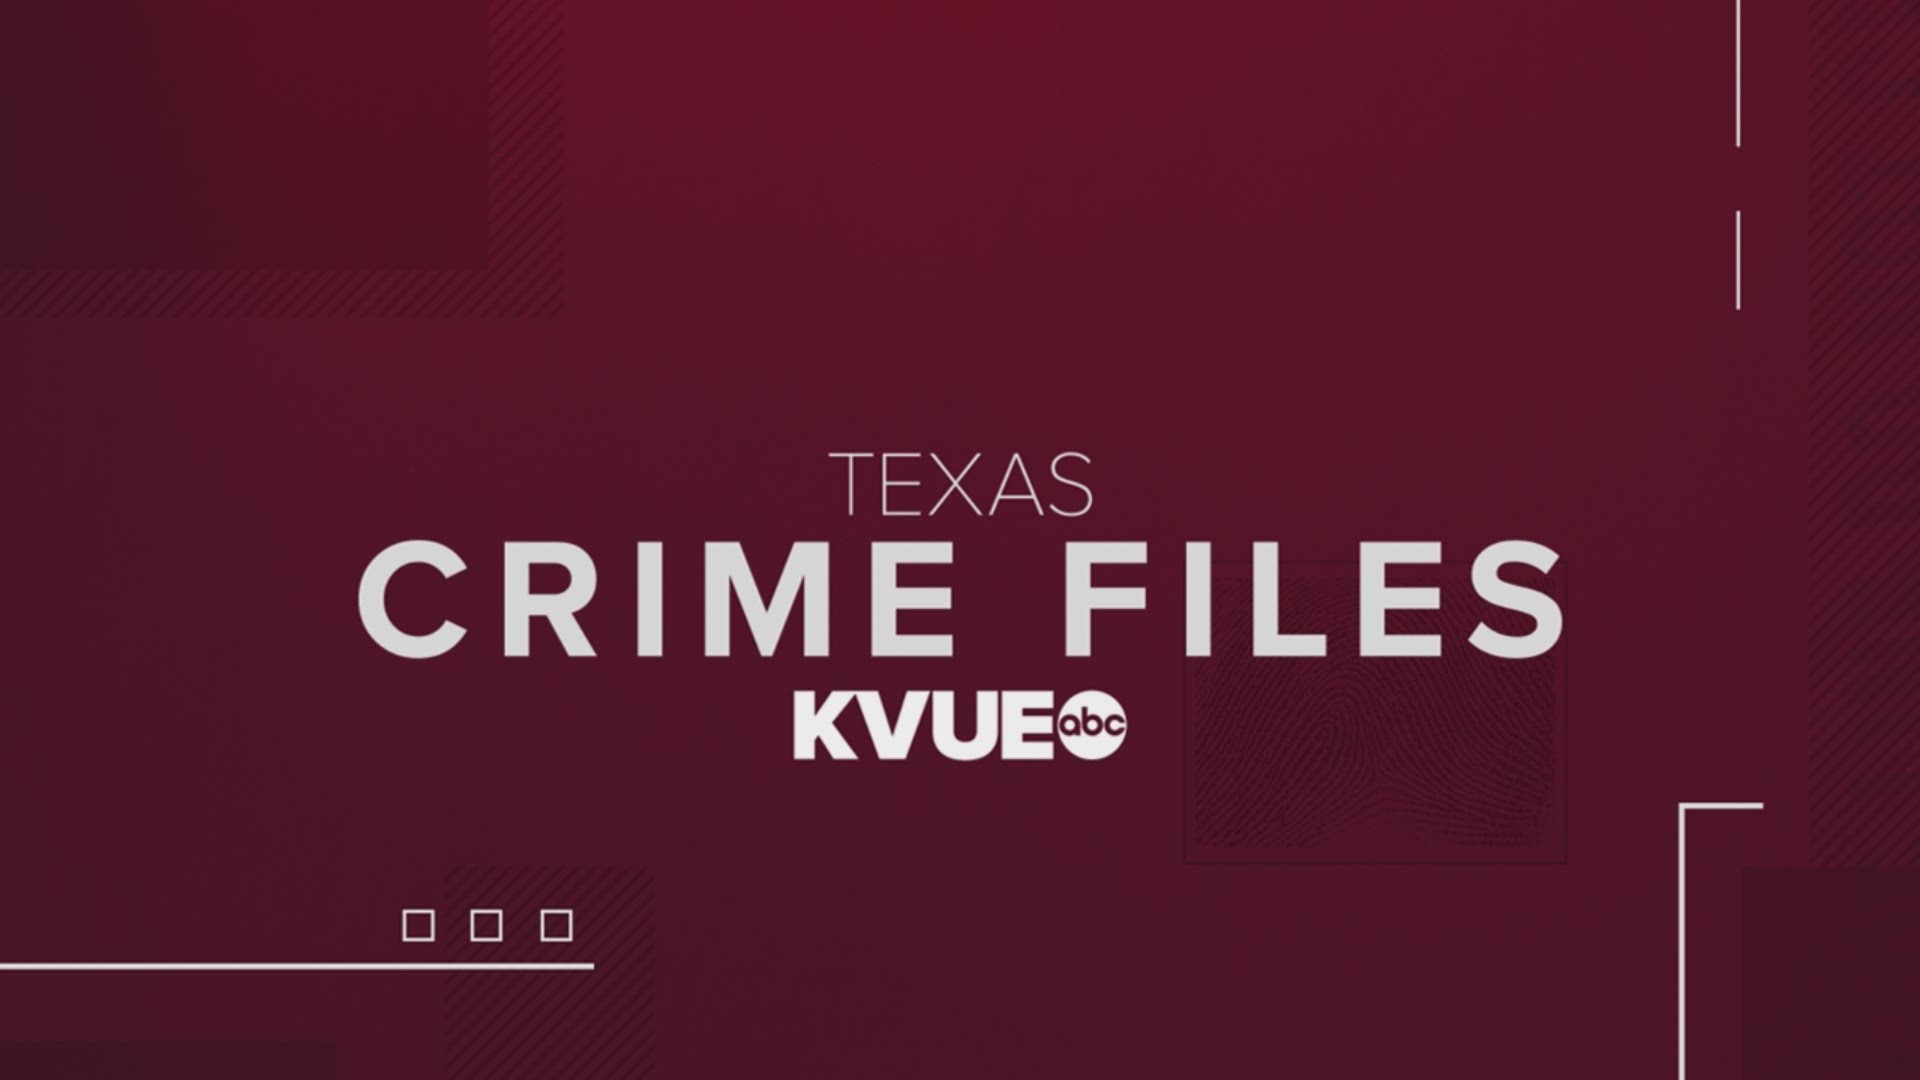 The Texas Crime Files podcast series examines the case of a man who may have been wrongly convicted and sentenced to die for the murder of a 19-year-old woman.